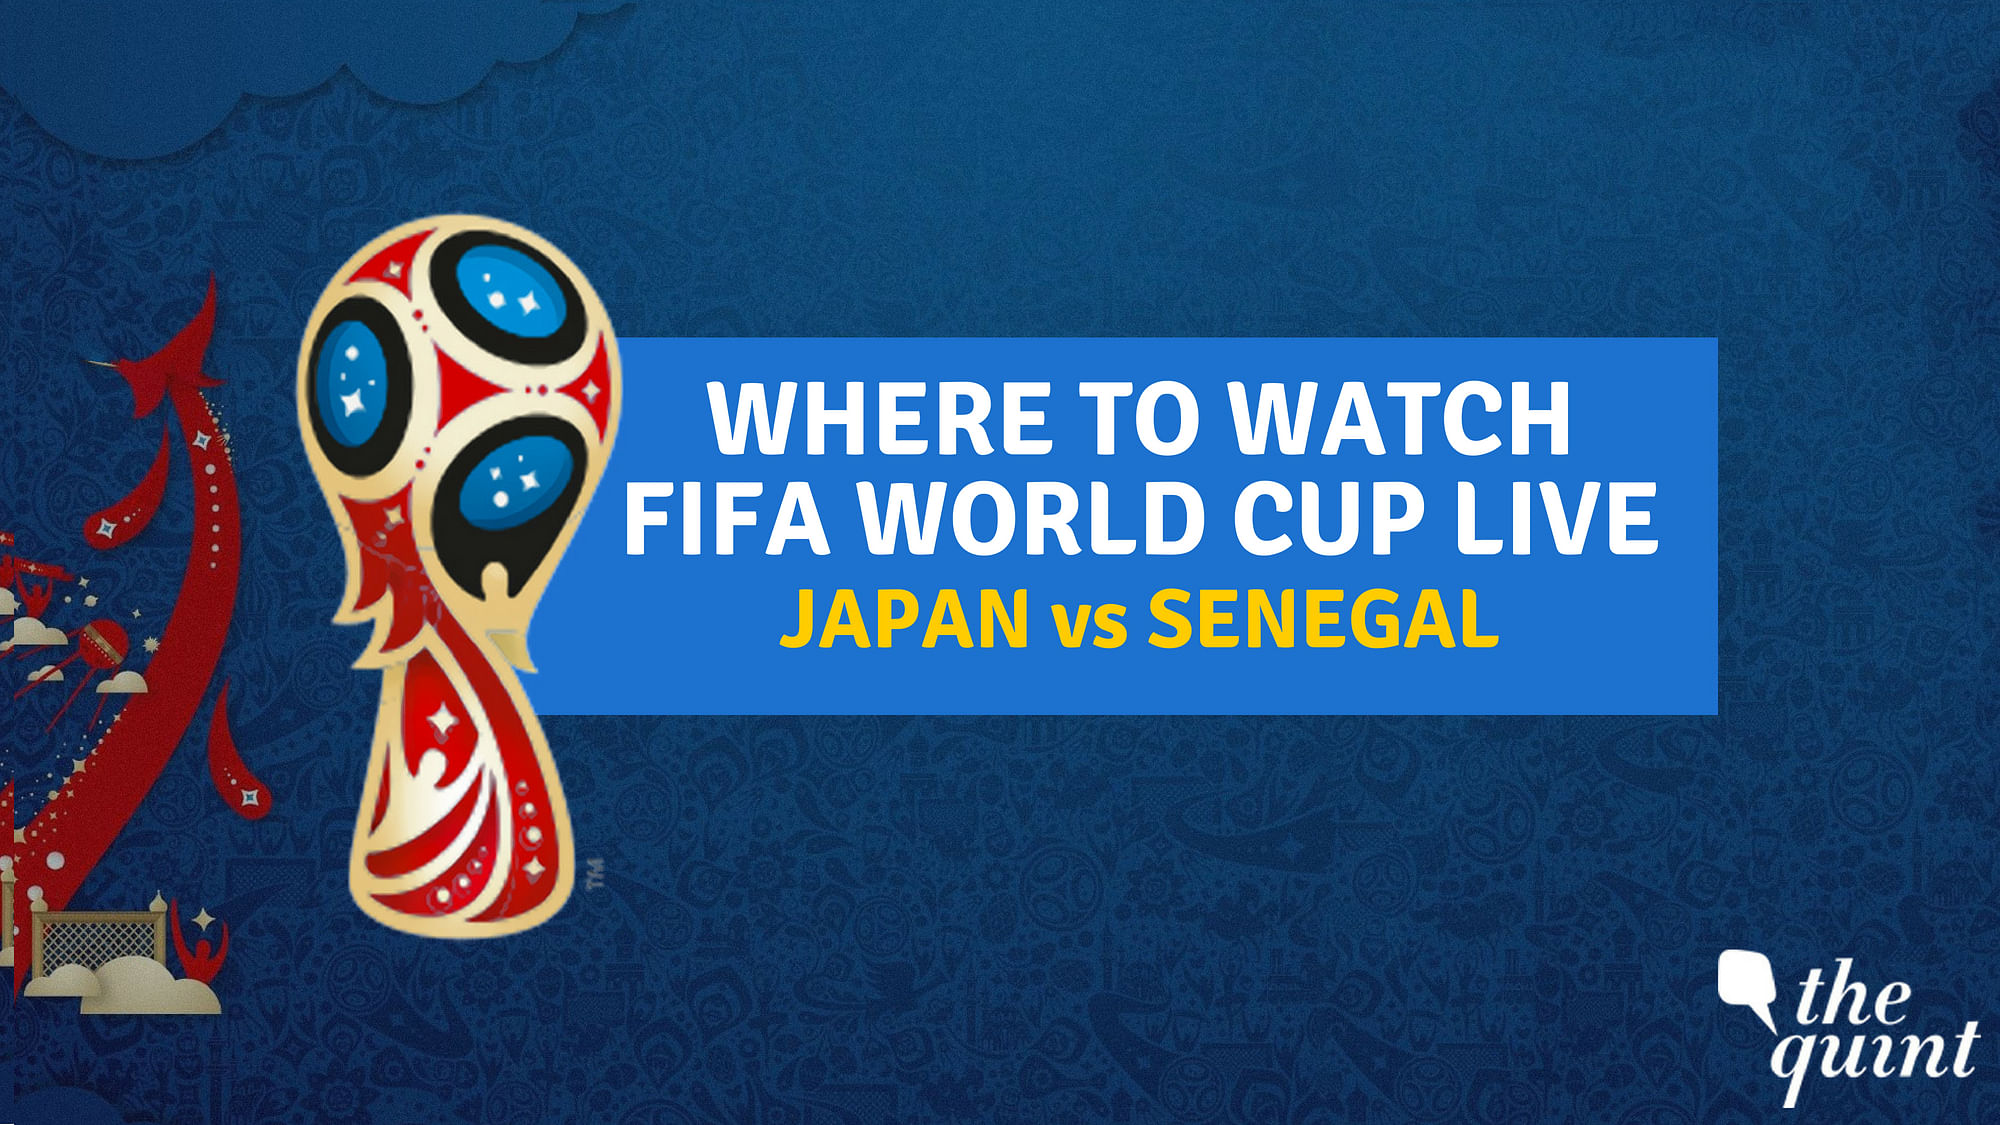 Japan vs Senegal FIFA World Cup 2018 Match will be played on 24 June.